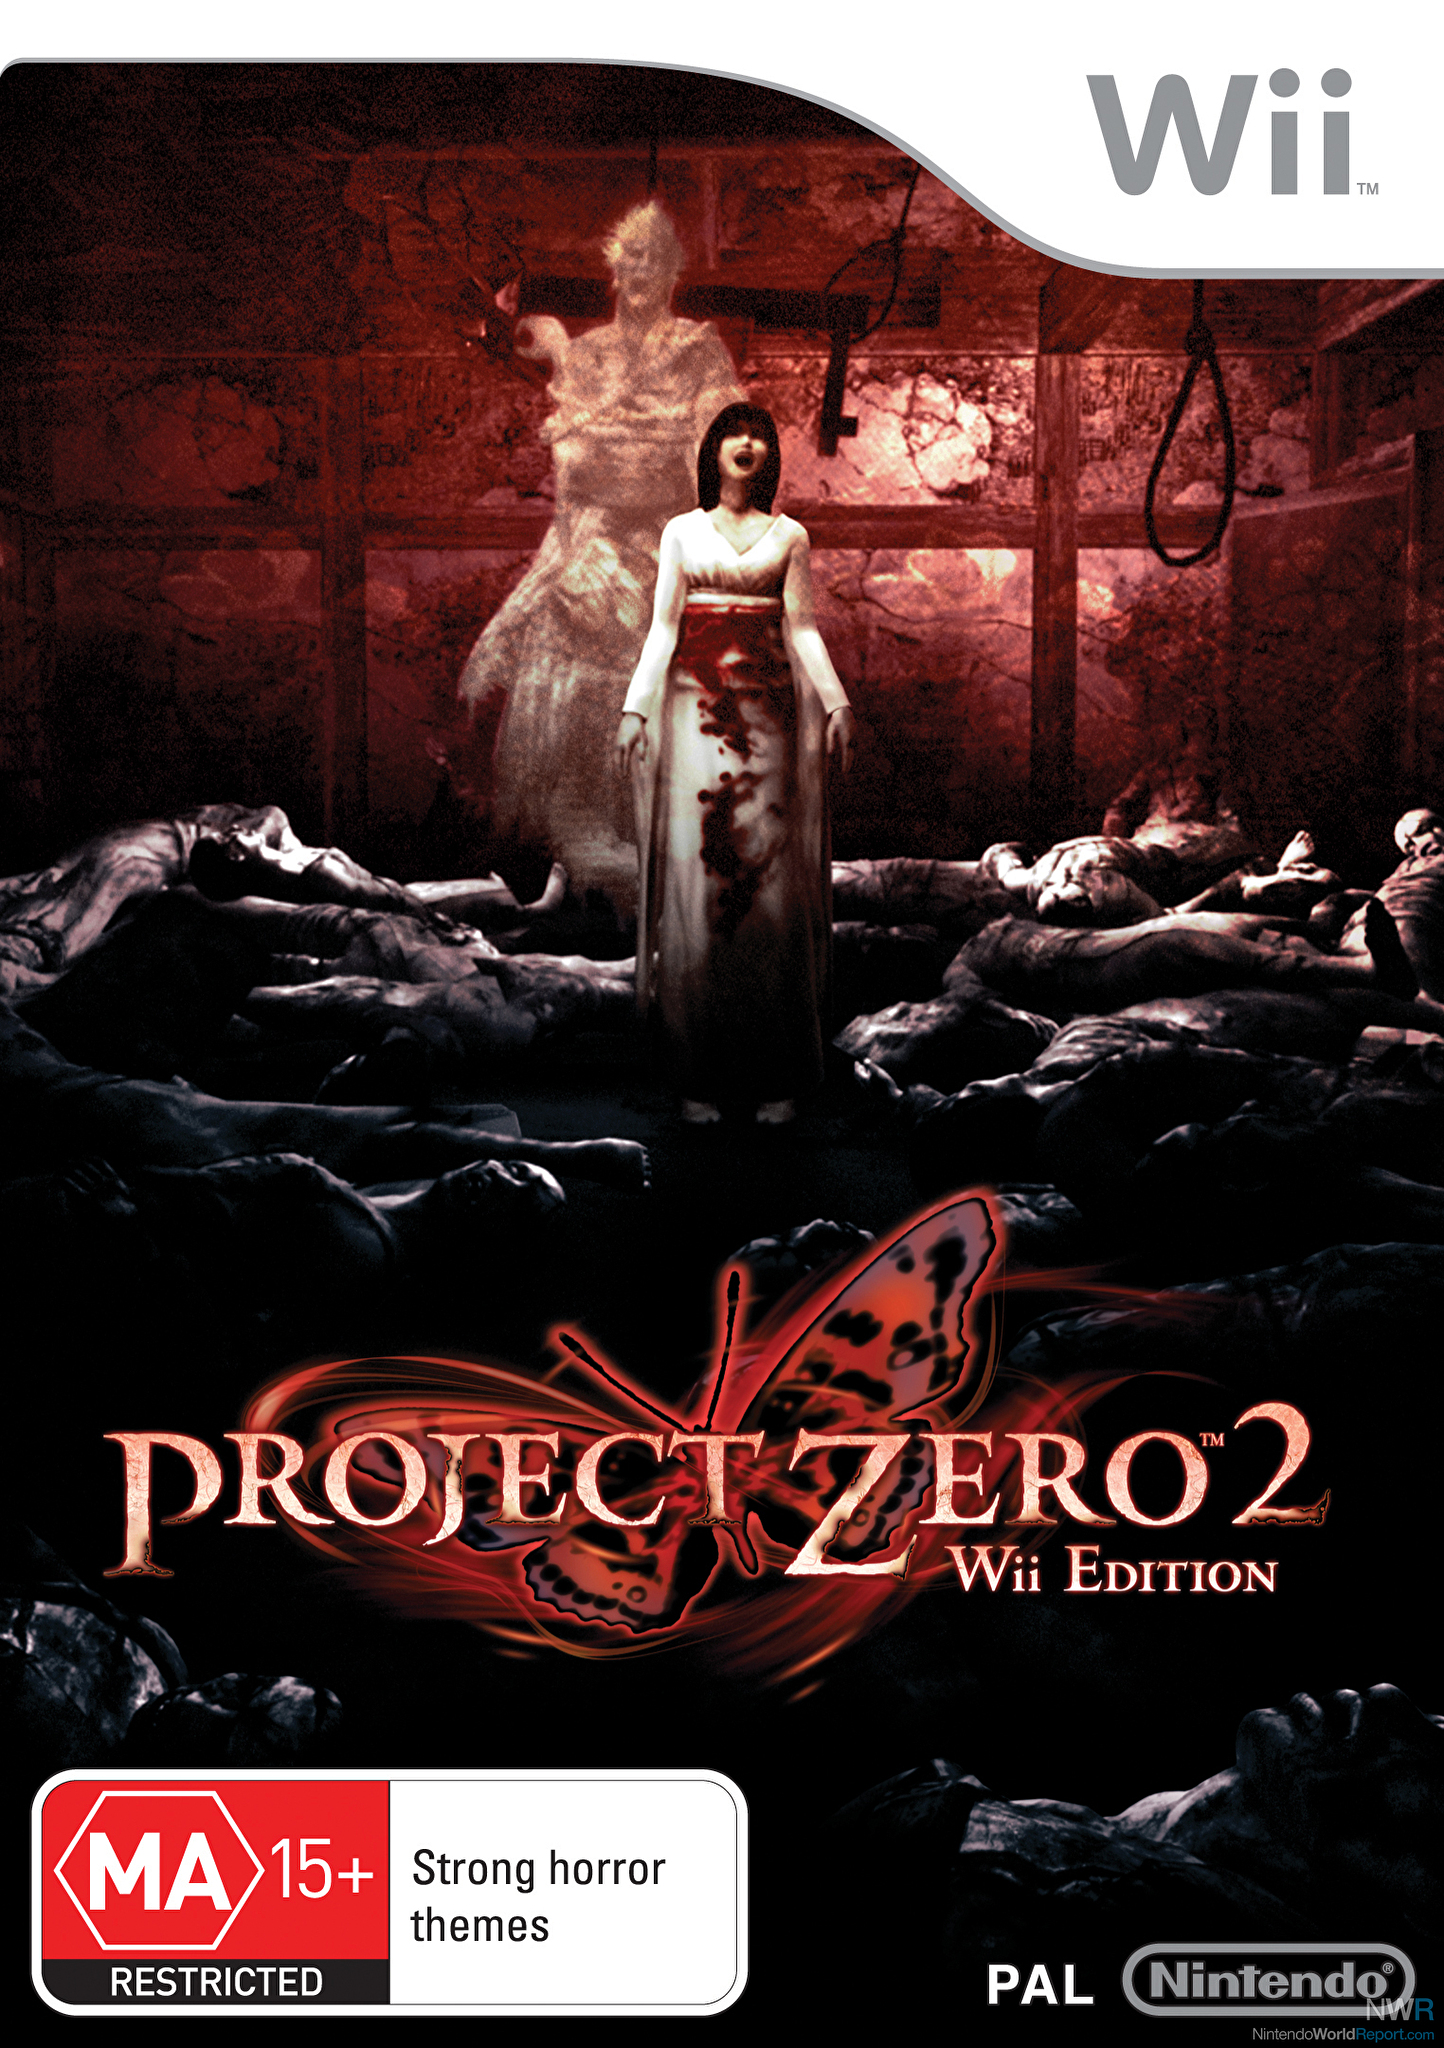 Project Zero 2: Wii Edition Review - Review - Nintendo World Report